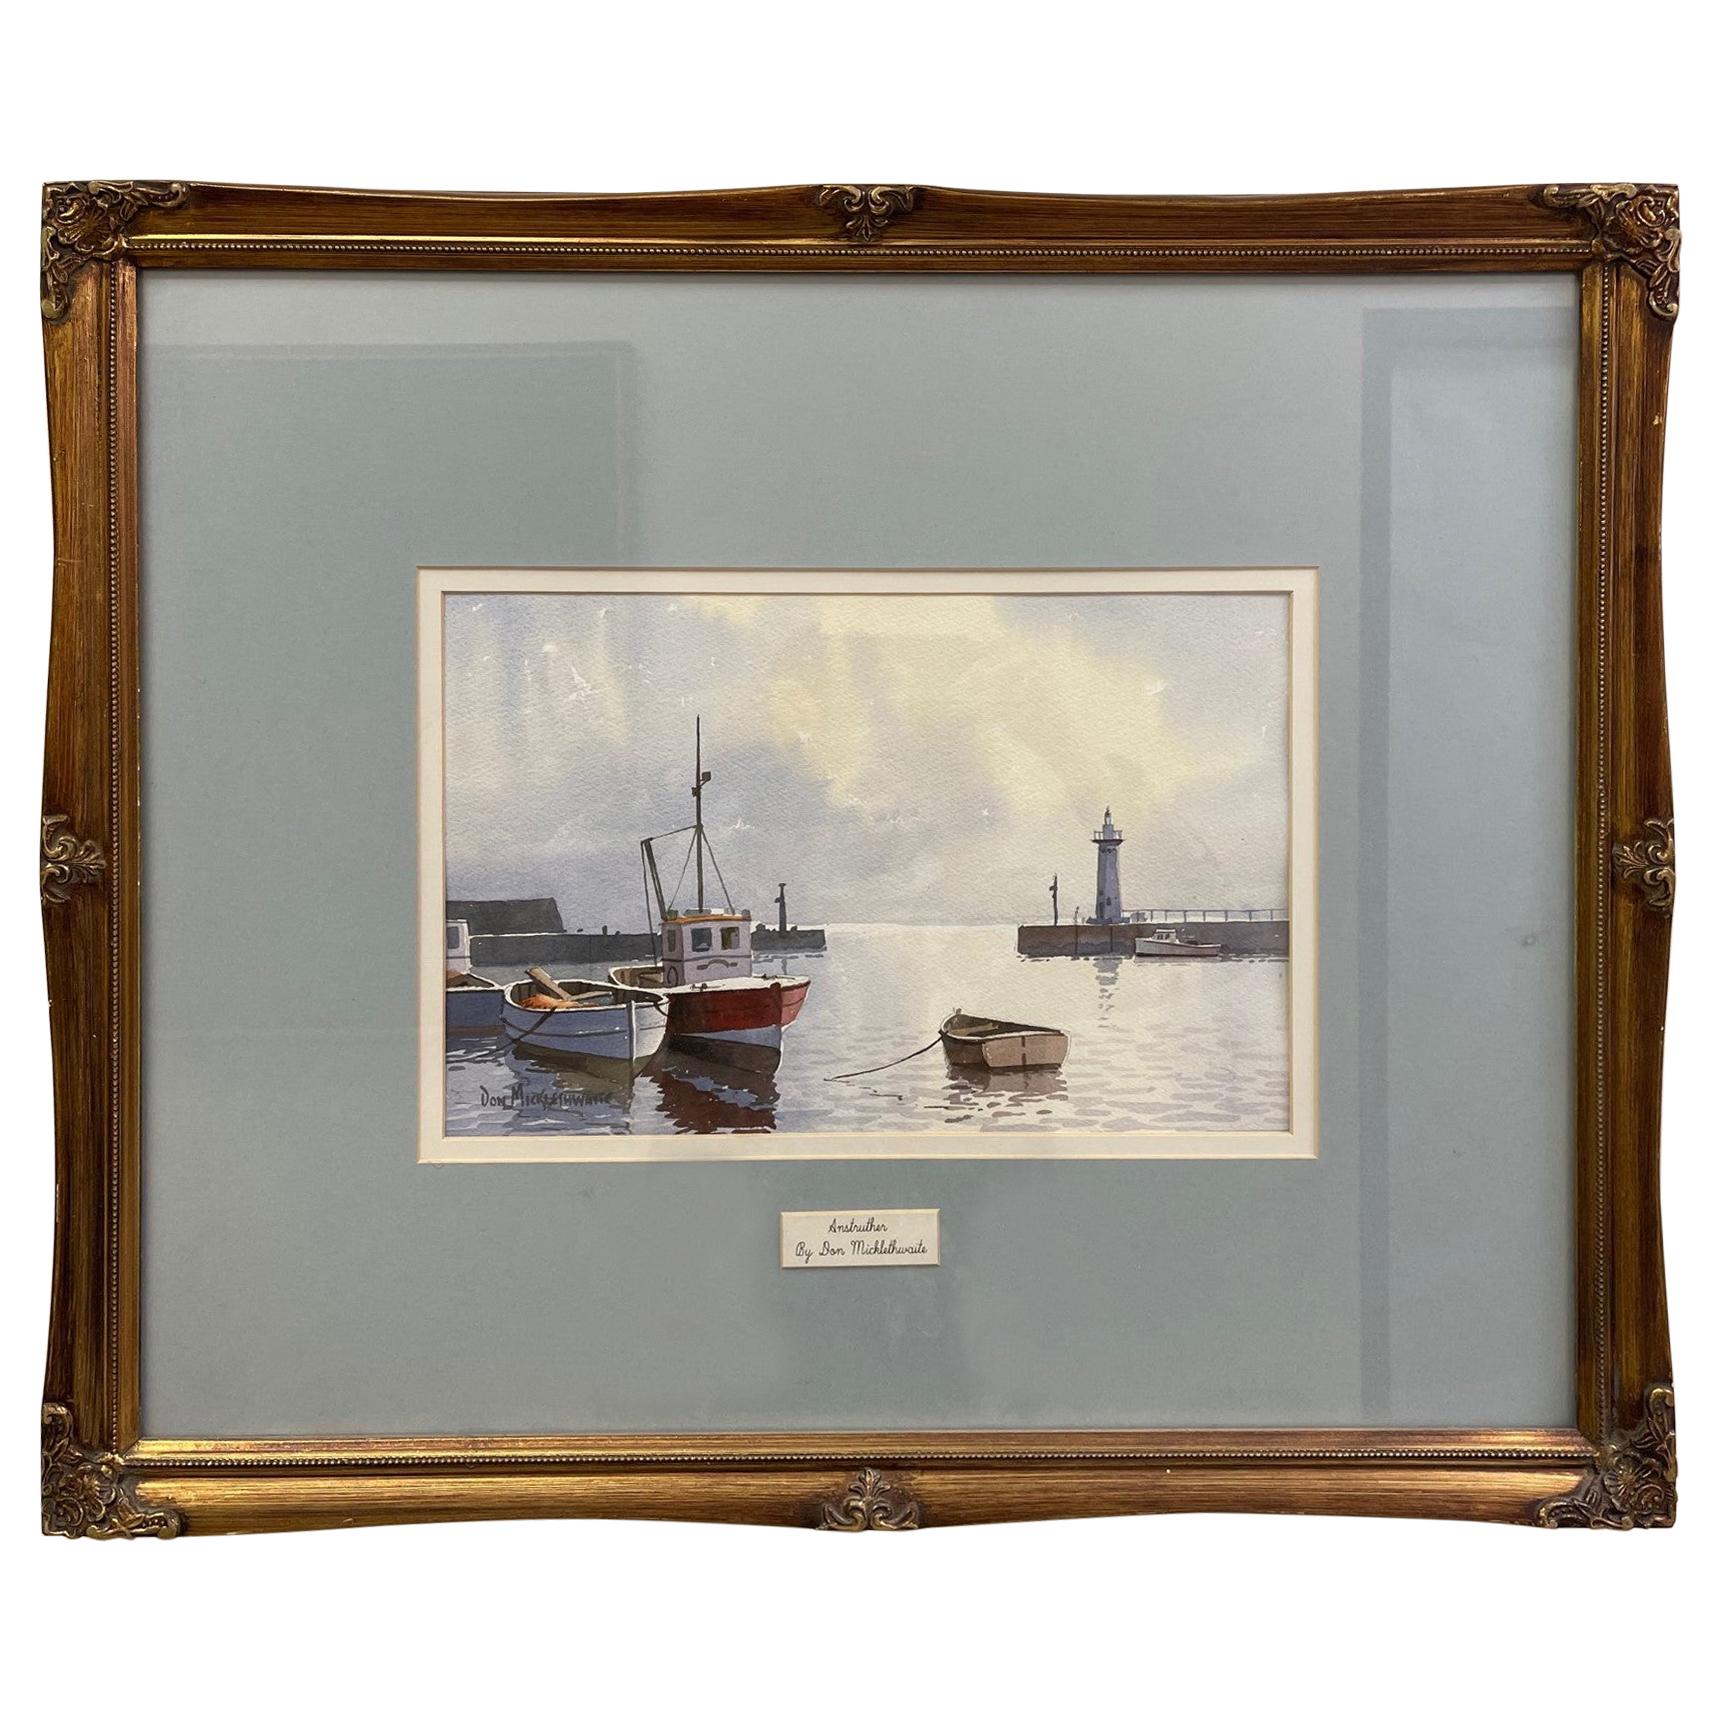 Don Micklethwaite Boats in a Harbour Watercolor on Paper British